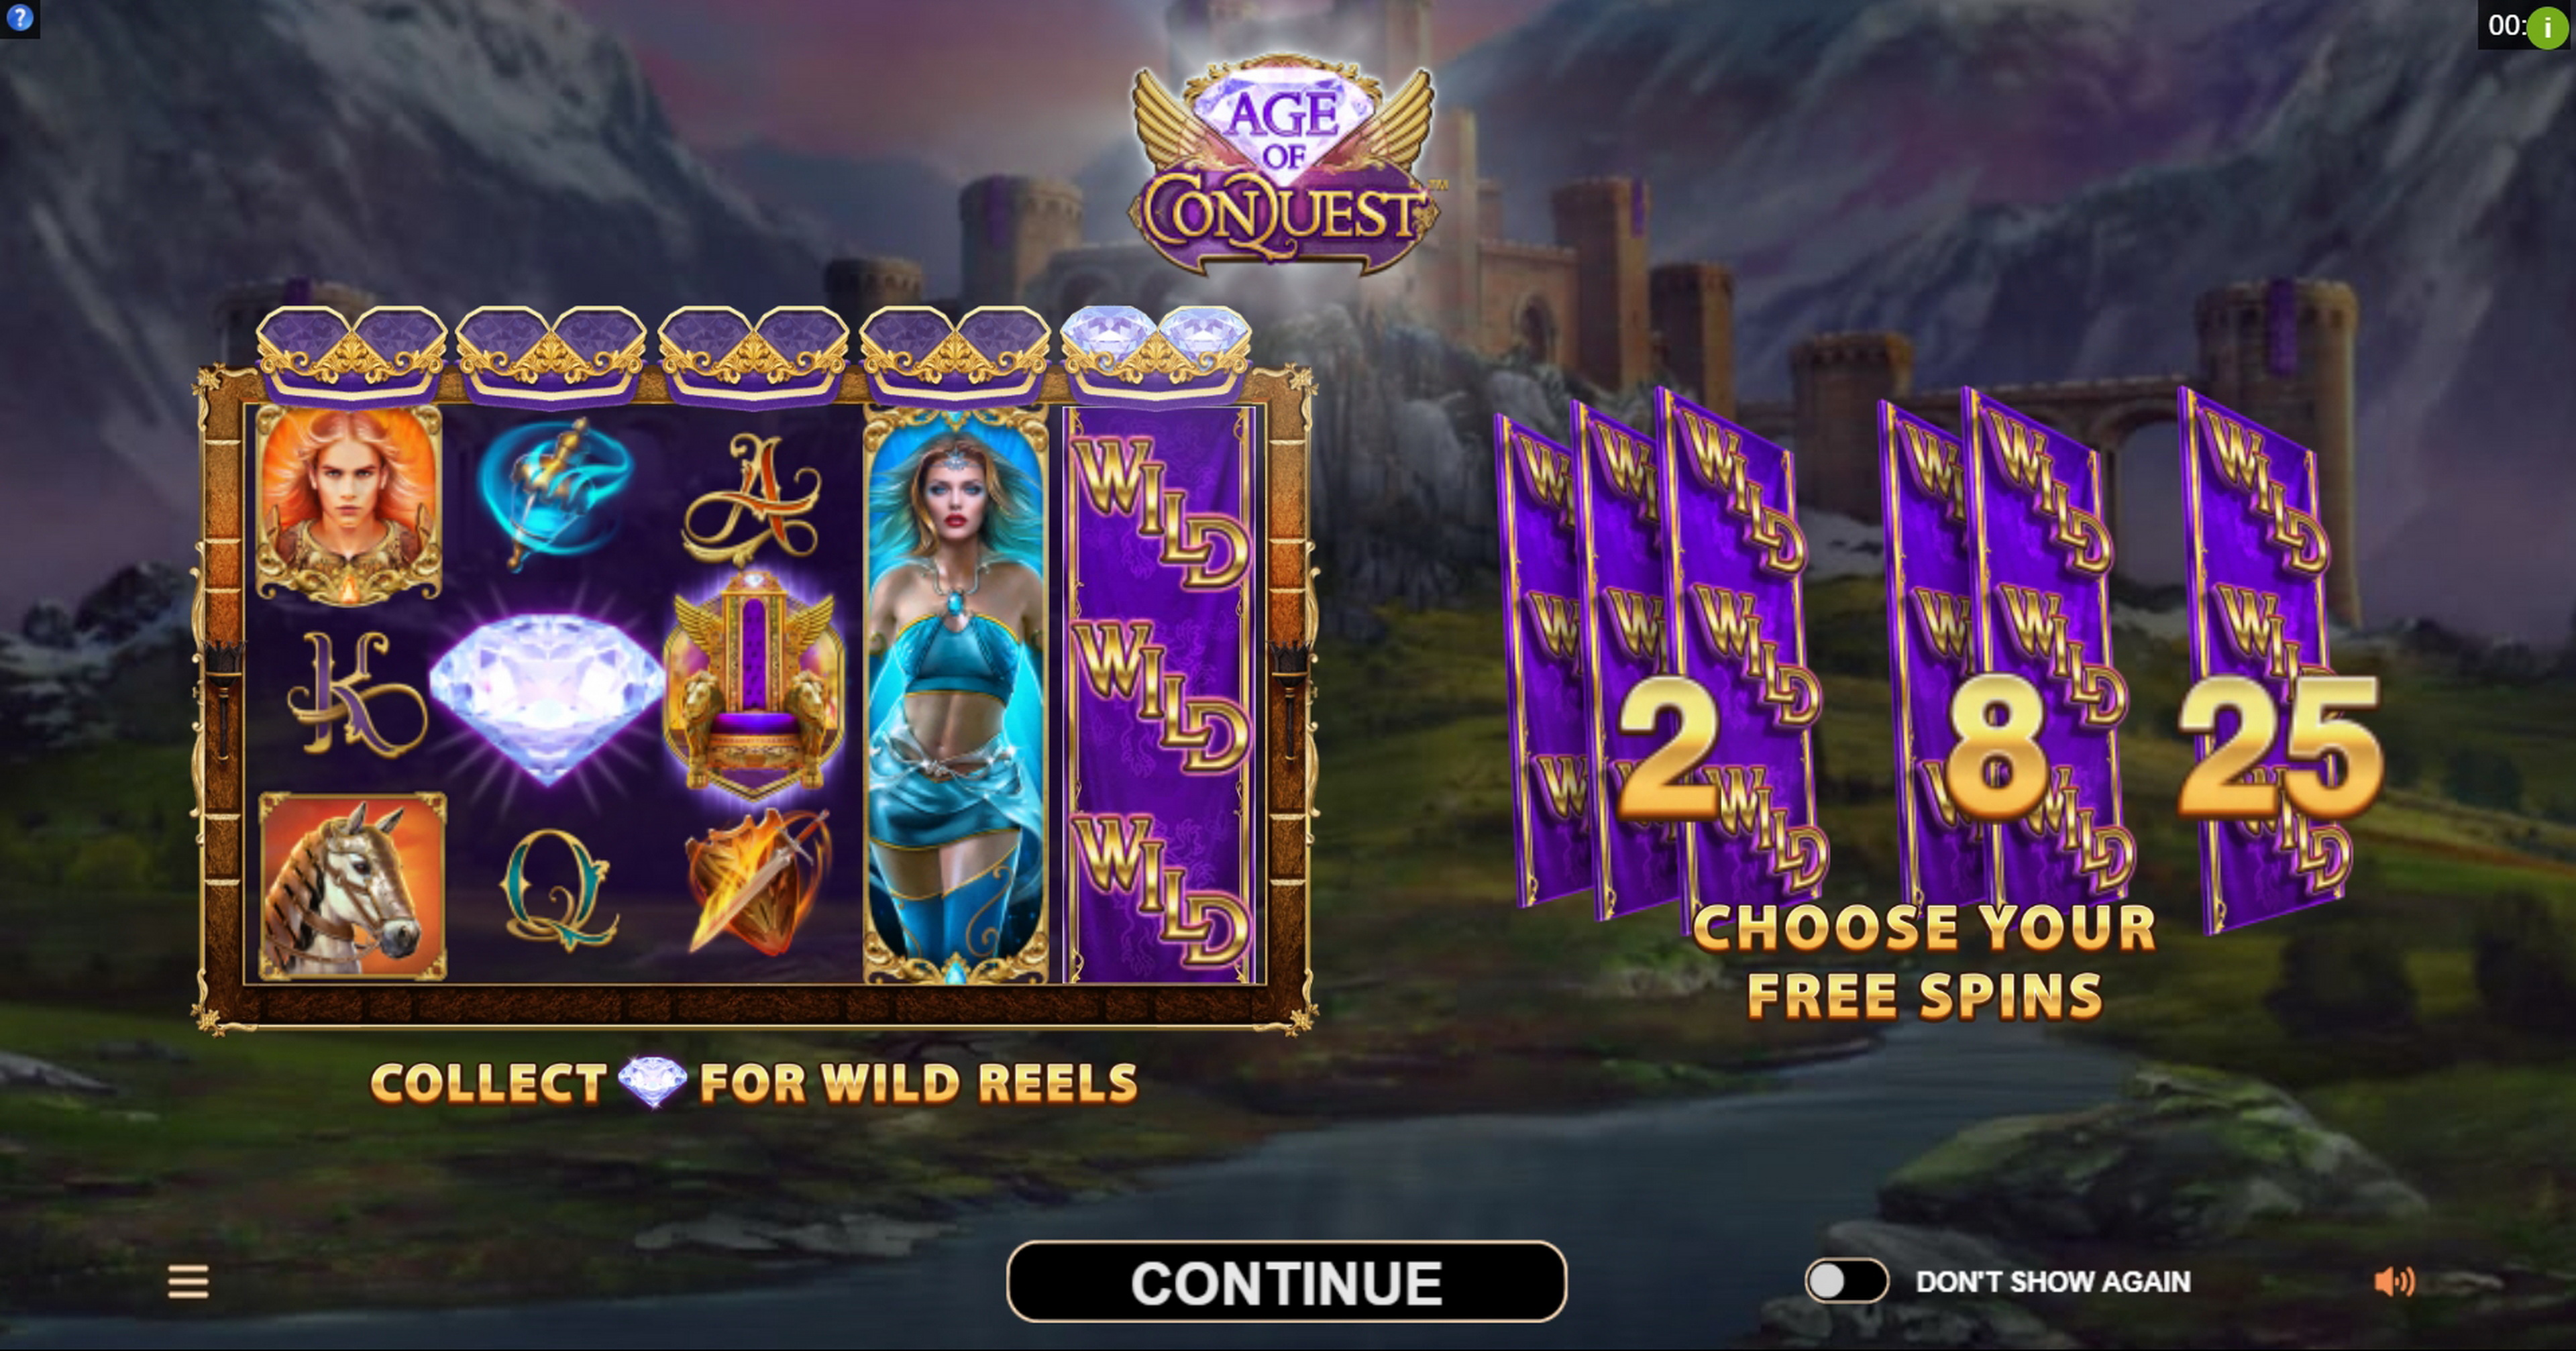 Play Age of Conquest Free Casino Slot Game by Neon Valley Studios